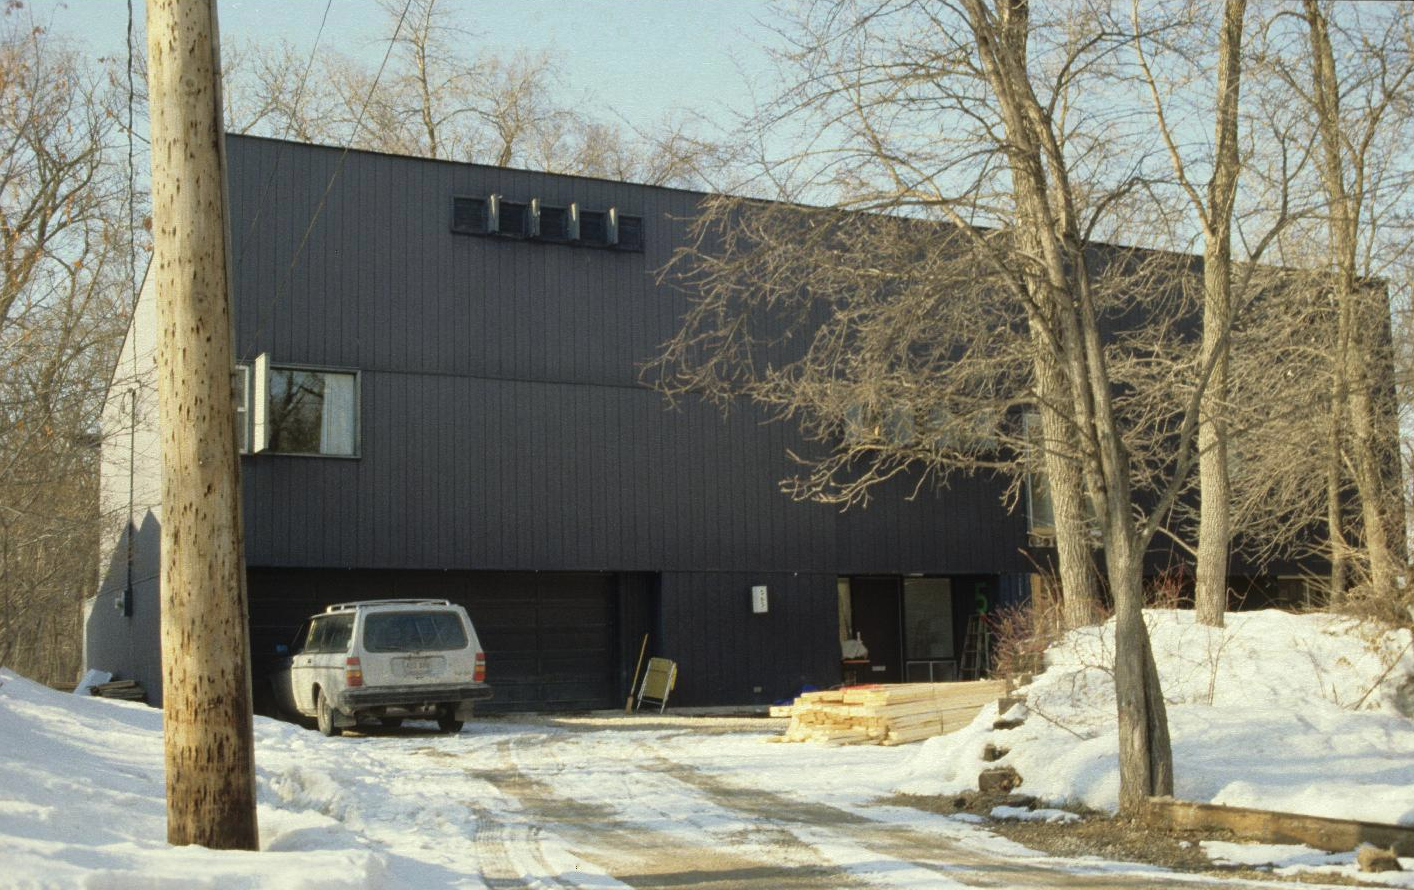 Image shows large residential structure with dark vertical panelling.